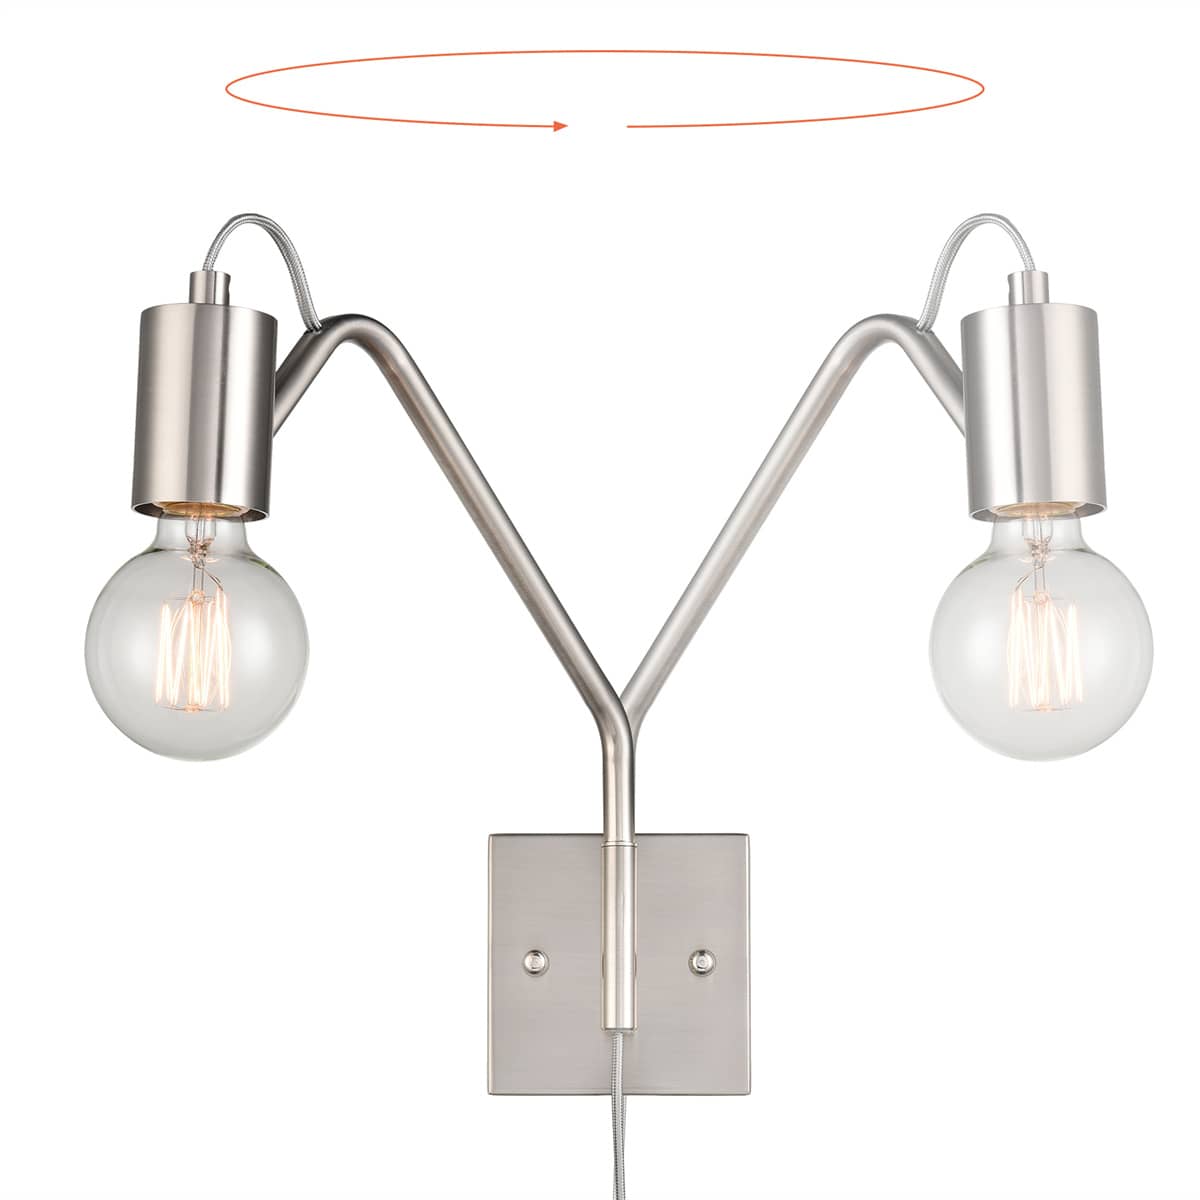 Modern Plug-in Wall Sconces Lighting Set of 2 with Switch, Brushed Nickel